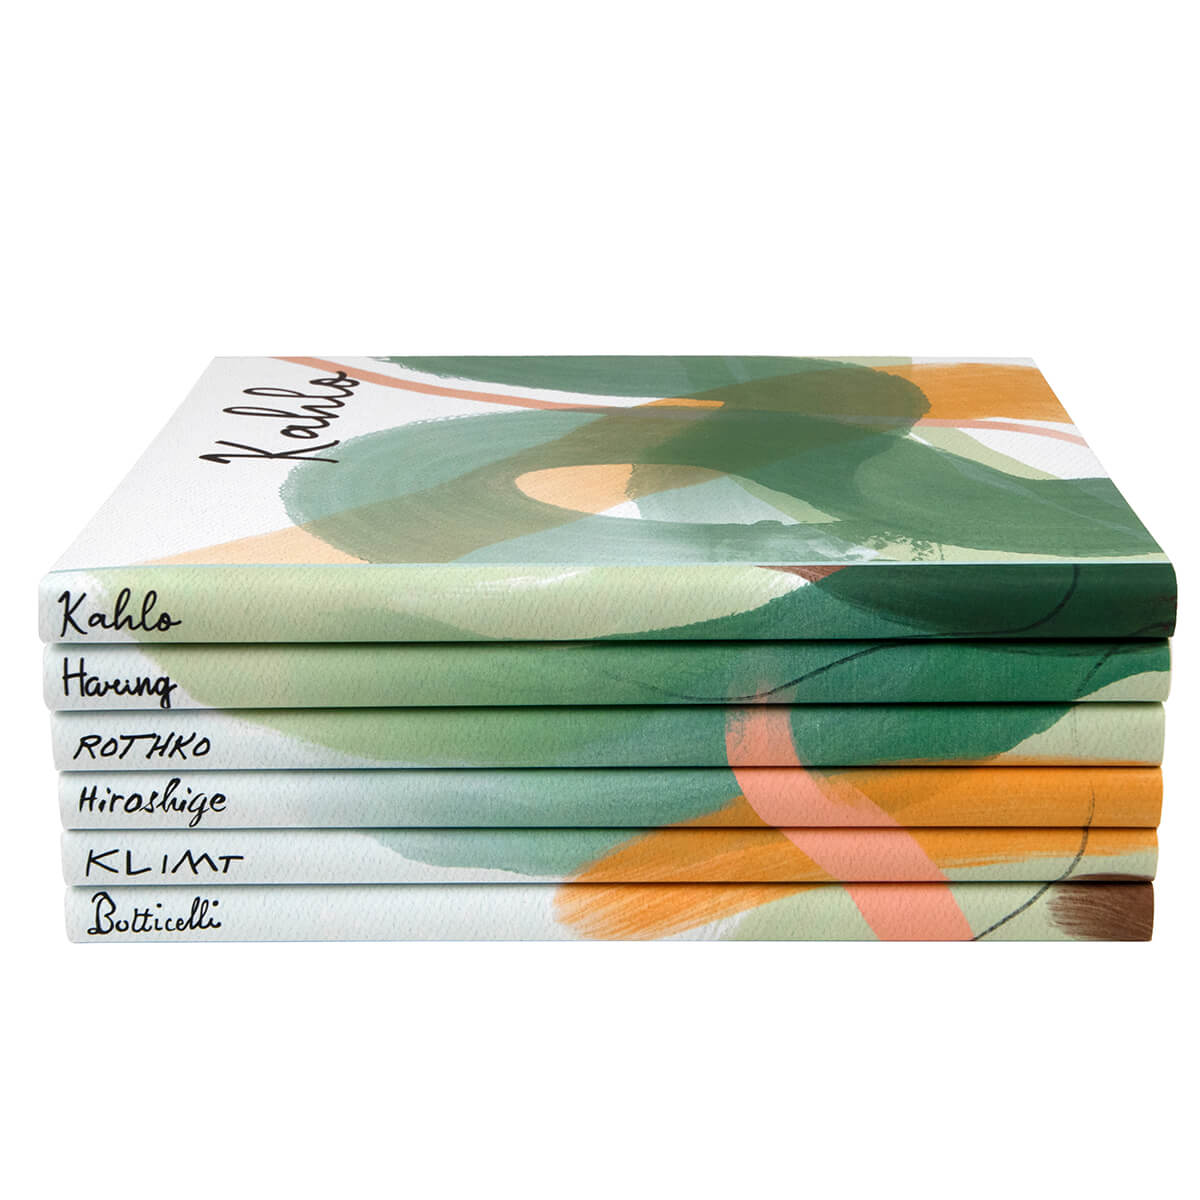 Customized Influential Women Writers Book Set